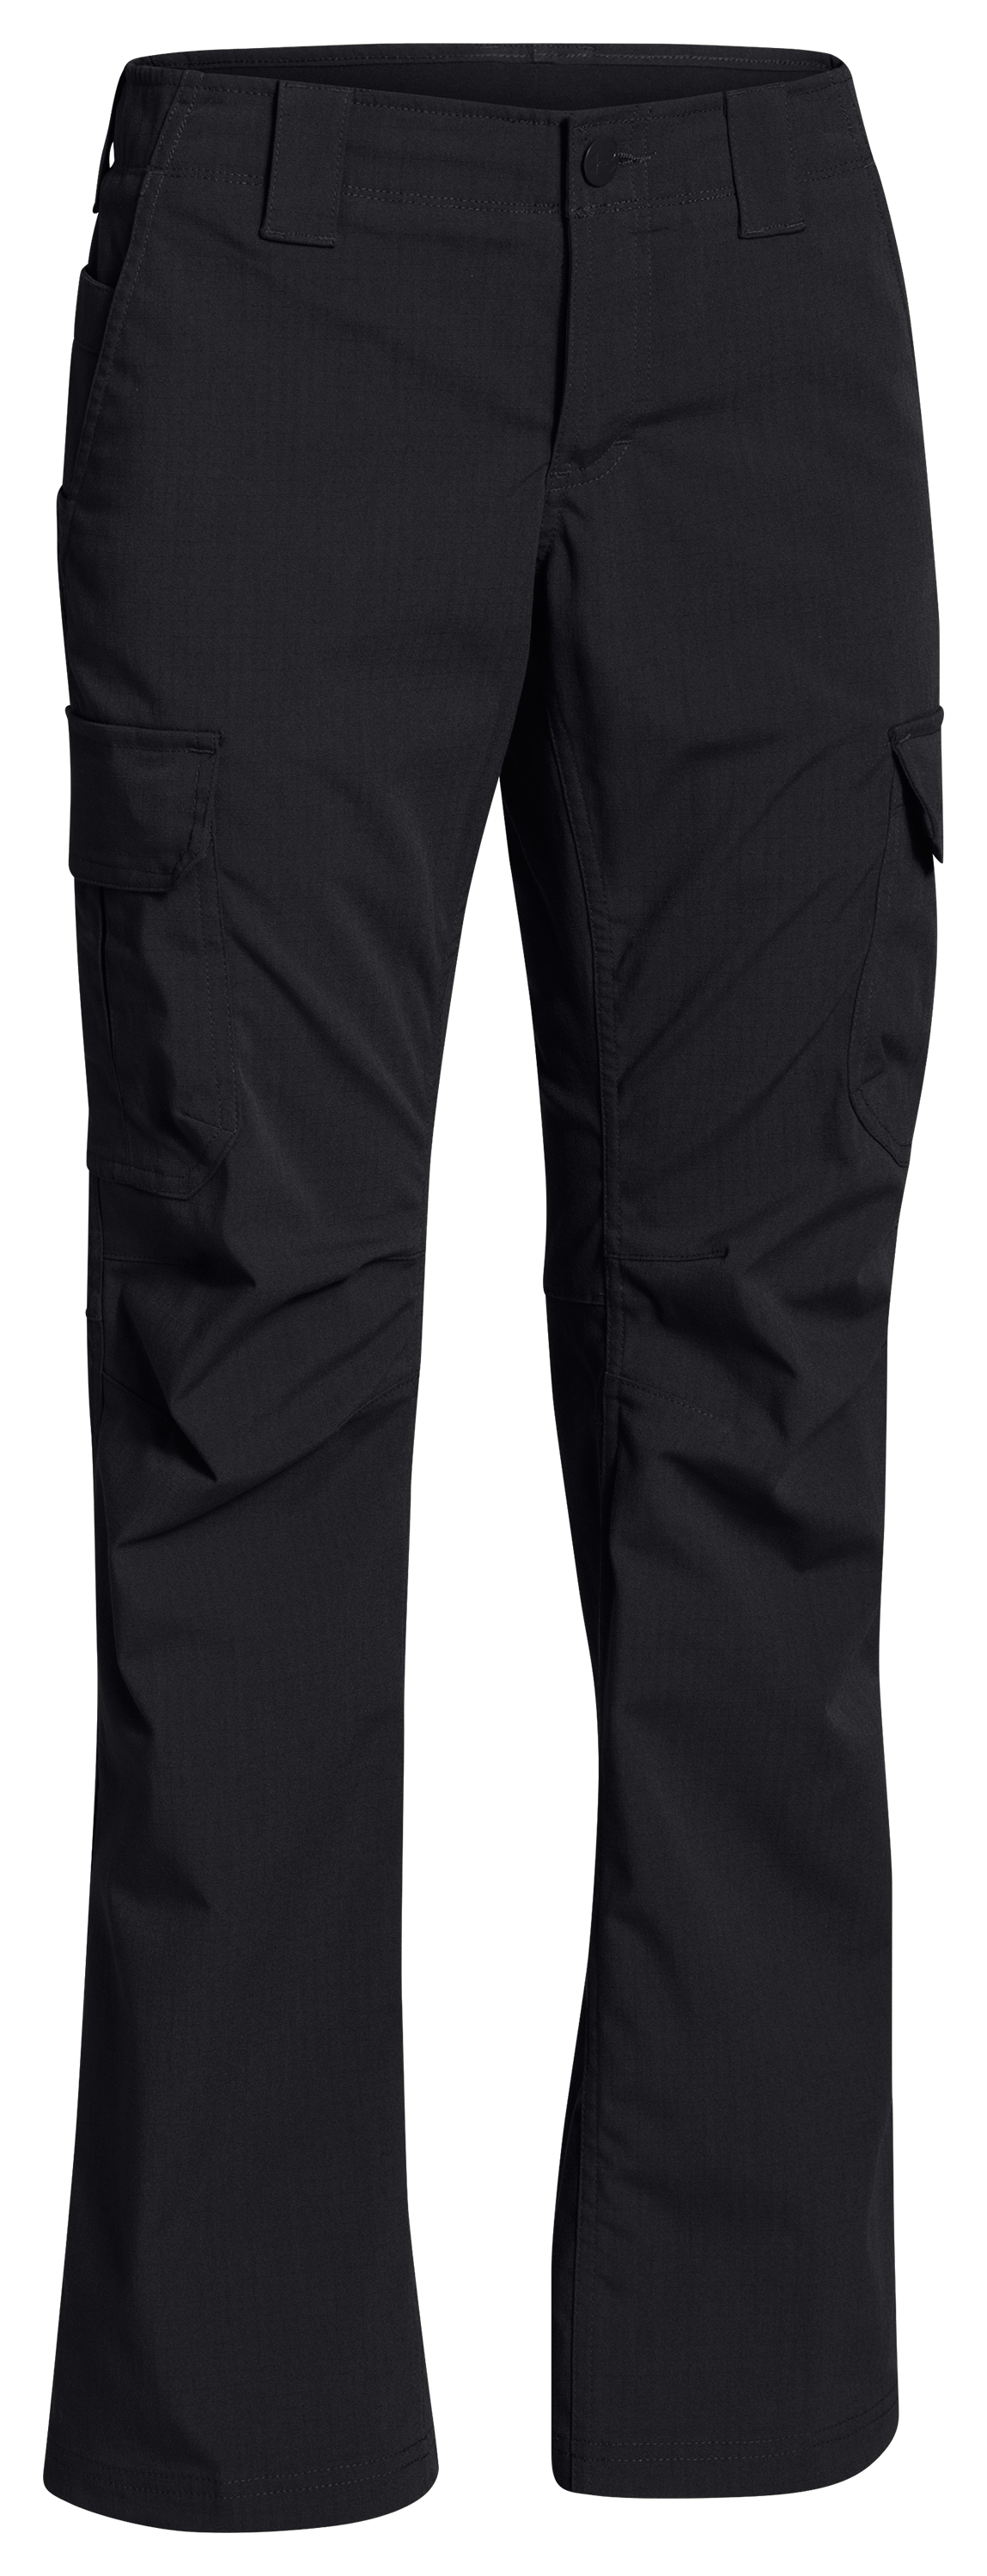 Under Armour Womens Tactical Patrol Pant - UA Loose-Fit Field Duty